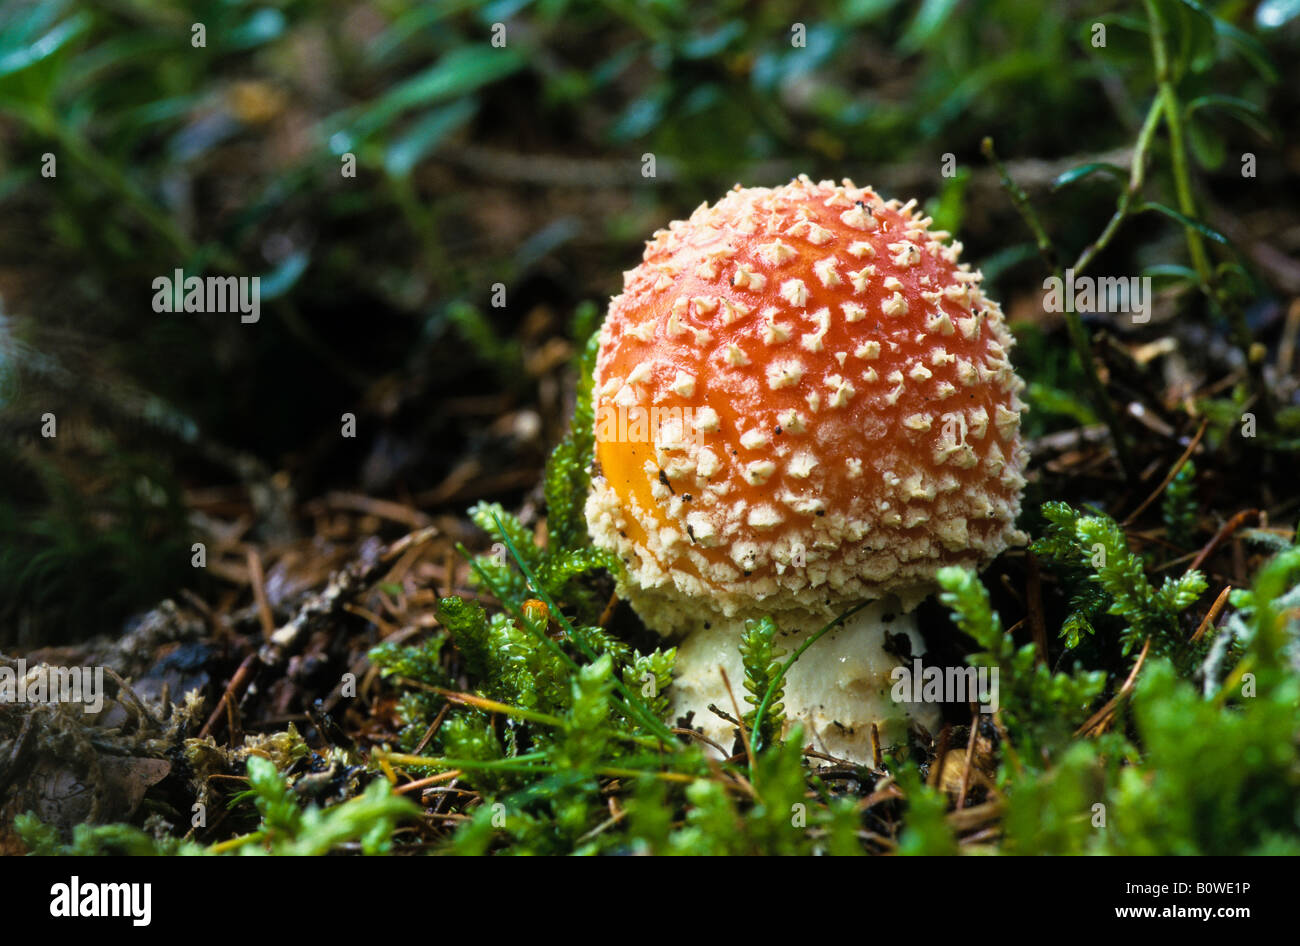 Fly Agaric mushroom (Amanita muscaria) on damp, mossy forest soil Stock Photo